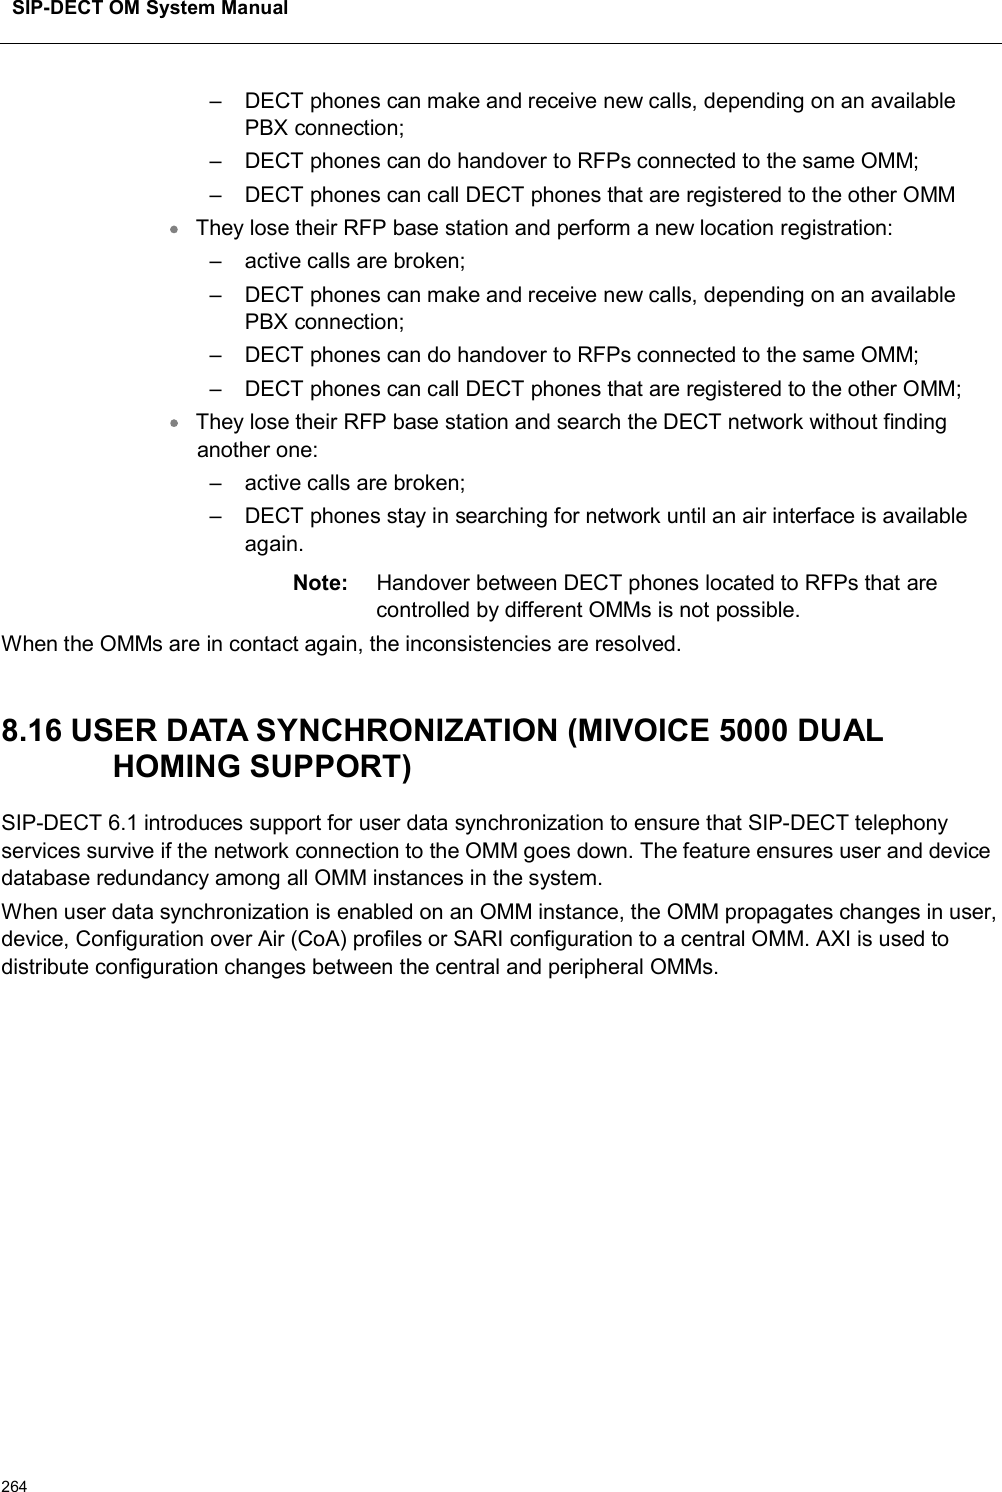 SIP-DECT OM System Manual264– DECT phones can make and receive new calls, depending on an available PBX connection;– DECT phones can do handover to RFPs connected to the same OMM;– DECT phones can call DECT phones that are registered to the other OMMThey lose their RFP base station and perform a new location registration:– active calls are broken;– DECT phones can make and receive new calls, depending on an available PBX connection;– DECT phones can do handover to RFPs connected to the same OMM;– DECT phones can call DECT phones that are registered to the other OMM;They lose their RFP base station and search the DECT network without finding another one:– active calls are broken; – DECT phones stay in searching for network until an air interface is available again.Note: Handover between DECT phones located to RFPs that are controlled by different OMMs is not possible.When the OMMs are in contact again, the inconsistencies are resolved. 8.16 USER DATA SYNCHRONIZATION (MIVOICE 5000 DUAL HOMING SUPPORT)SIP-DECT 6.1 introduces support for user data synchronization to ensure that SIP-DECT telephony services survive if the network connection to the OMM goes down. The feature ensures user and device database redundancy among all OMM instances in the system. When user data synchronization is enabled on an OMM instance, the OMM propagates changes in user, device, Configuration over Air (CoA) profiles or SARI configuration to a central OMM. AXI is used to distribute configuration changes between the central and peripheral OMMs. 